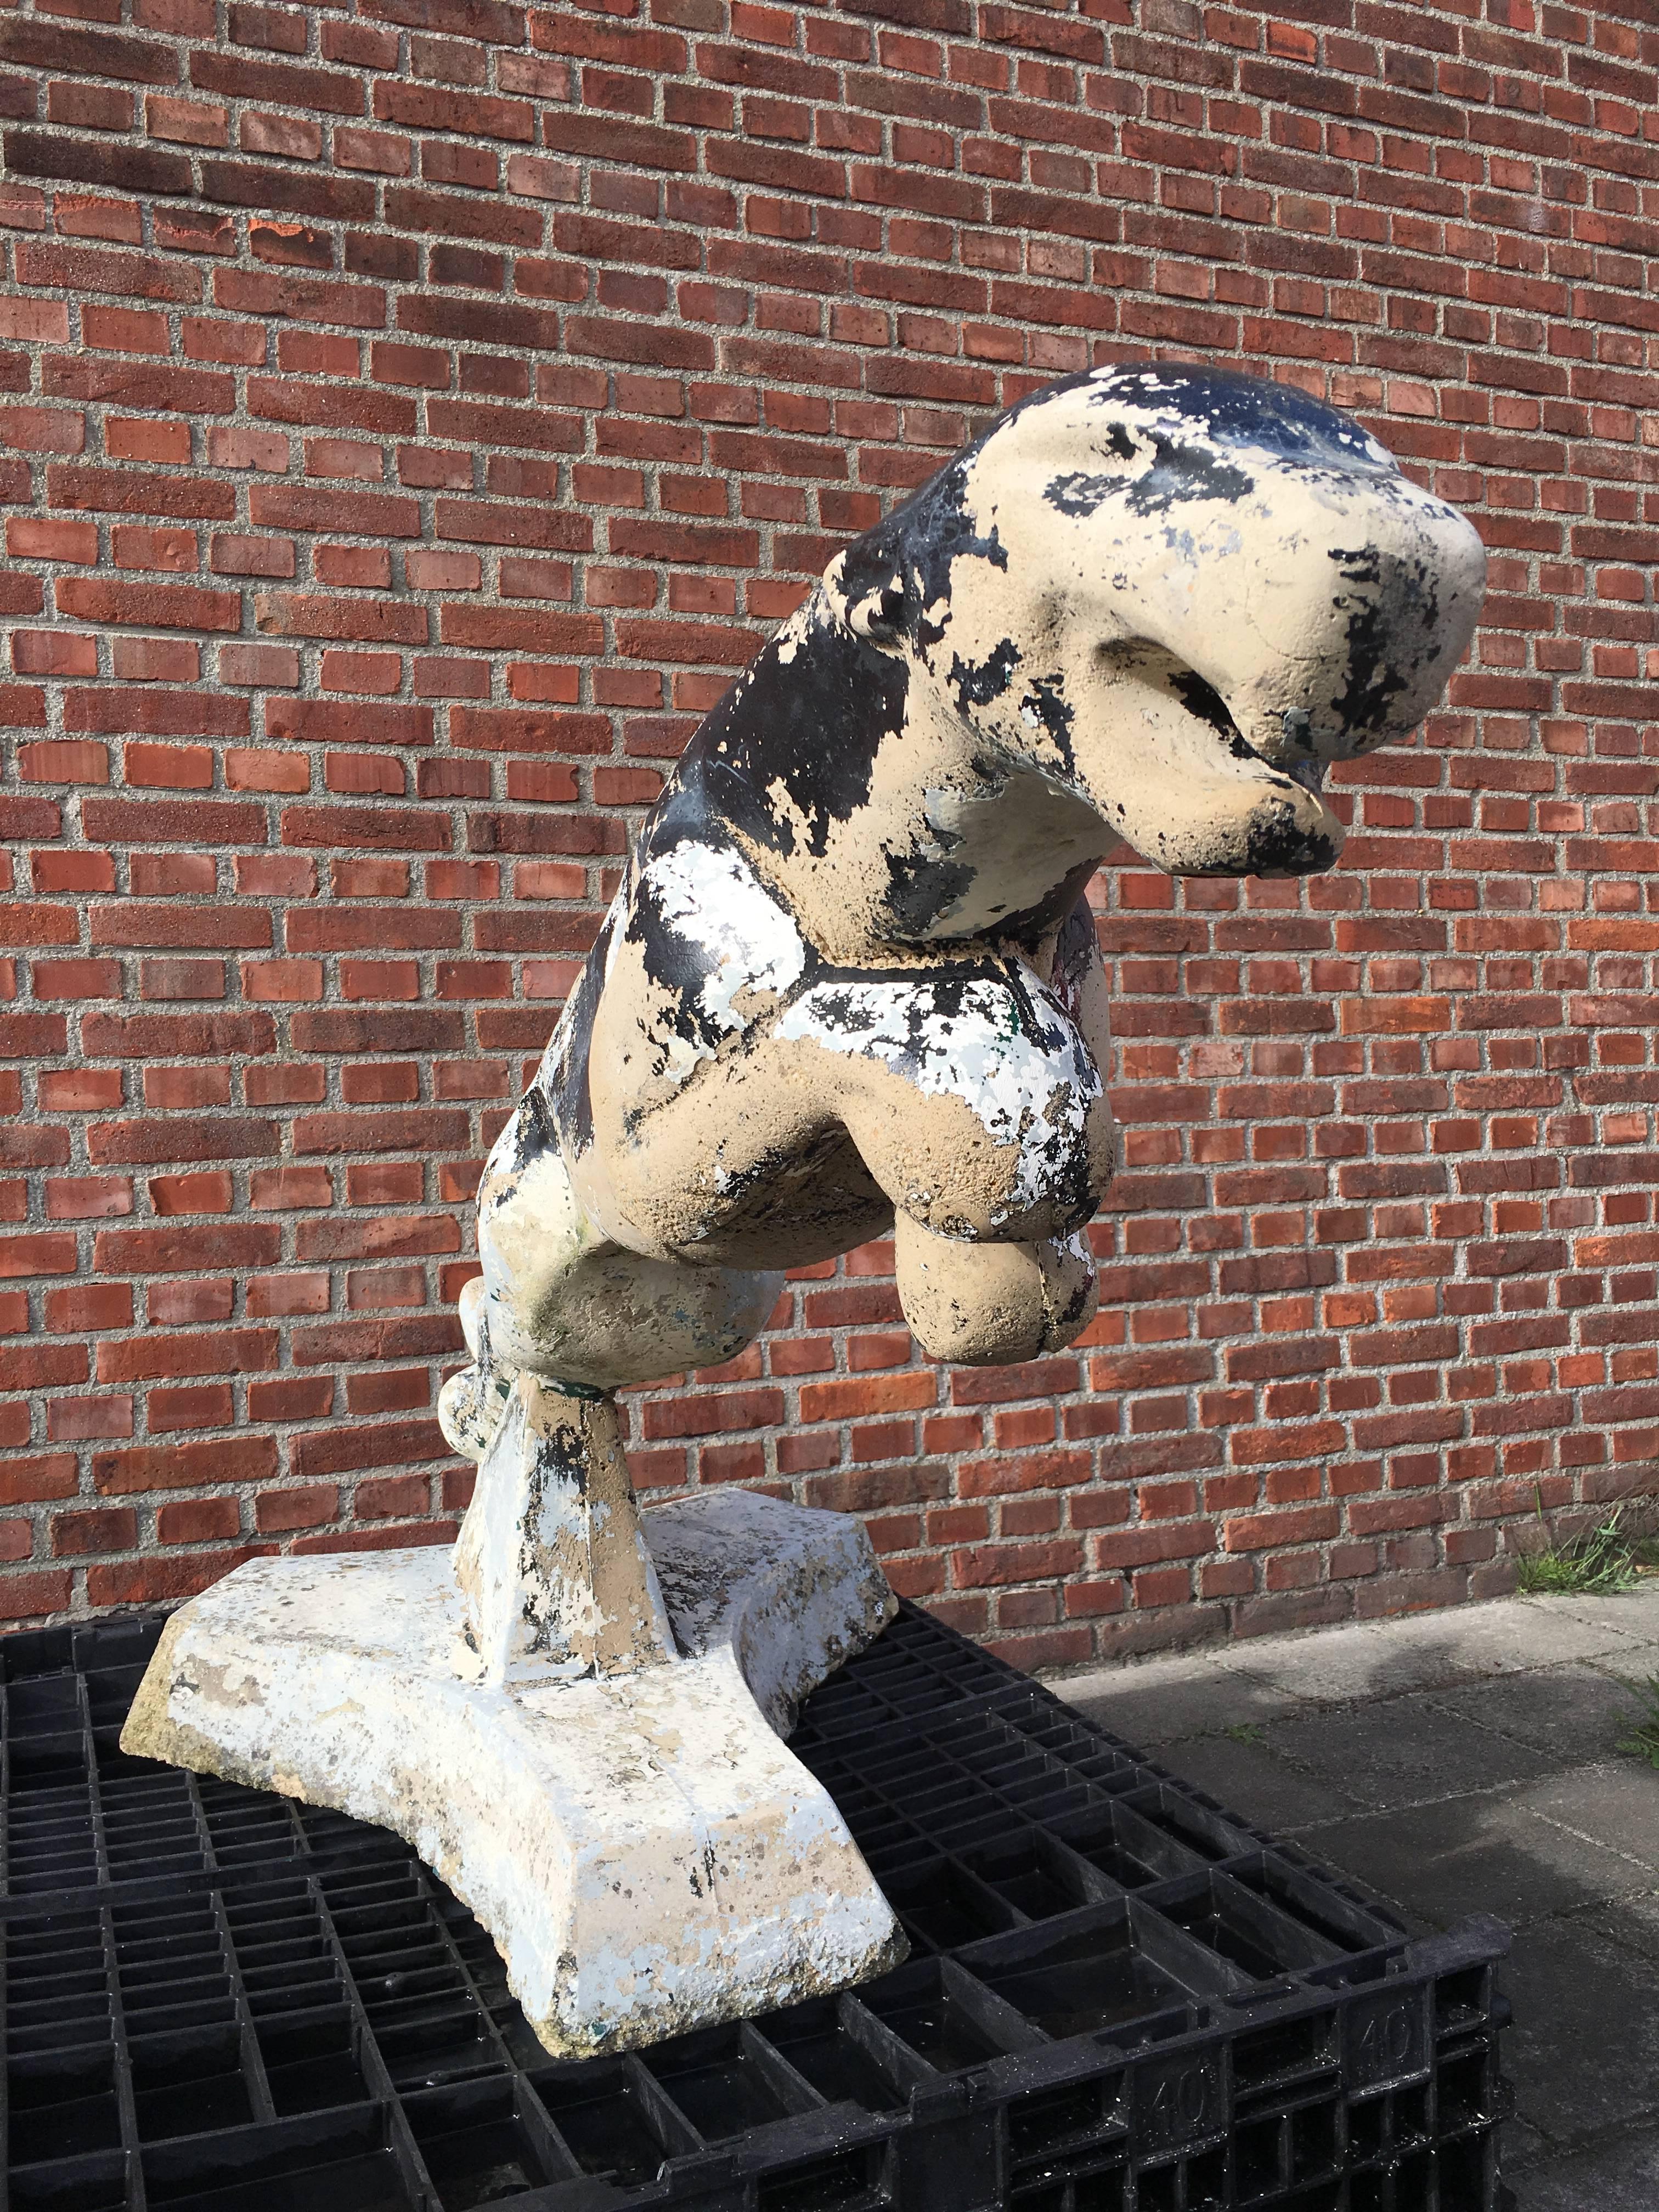 This impressive and unique concrete Jaguar mascot has been salvaged from a Jaguar dealer in Belgium where it was used outdoors for advertising
The Jaguar mascot has a beautiful patinated look as it was painted several times in different colours,